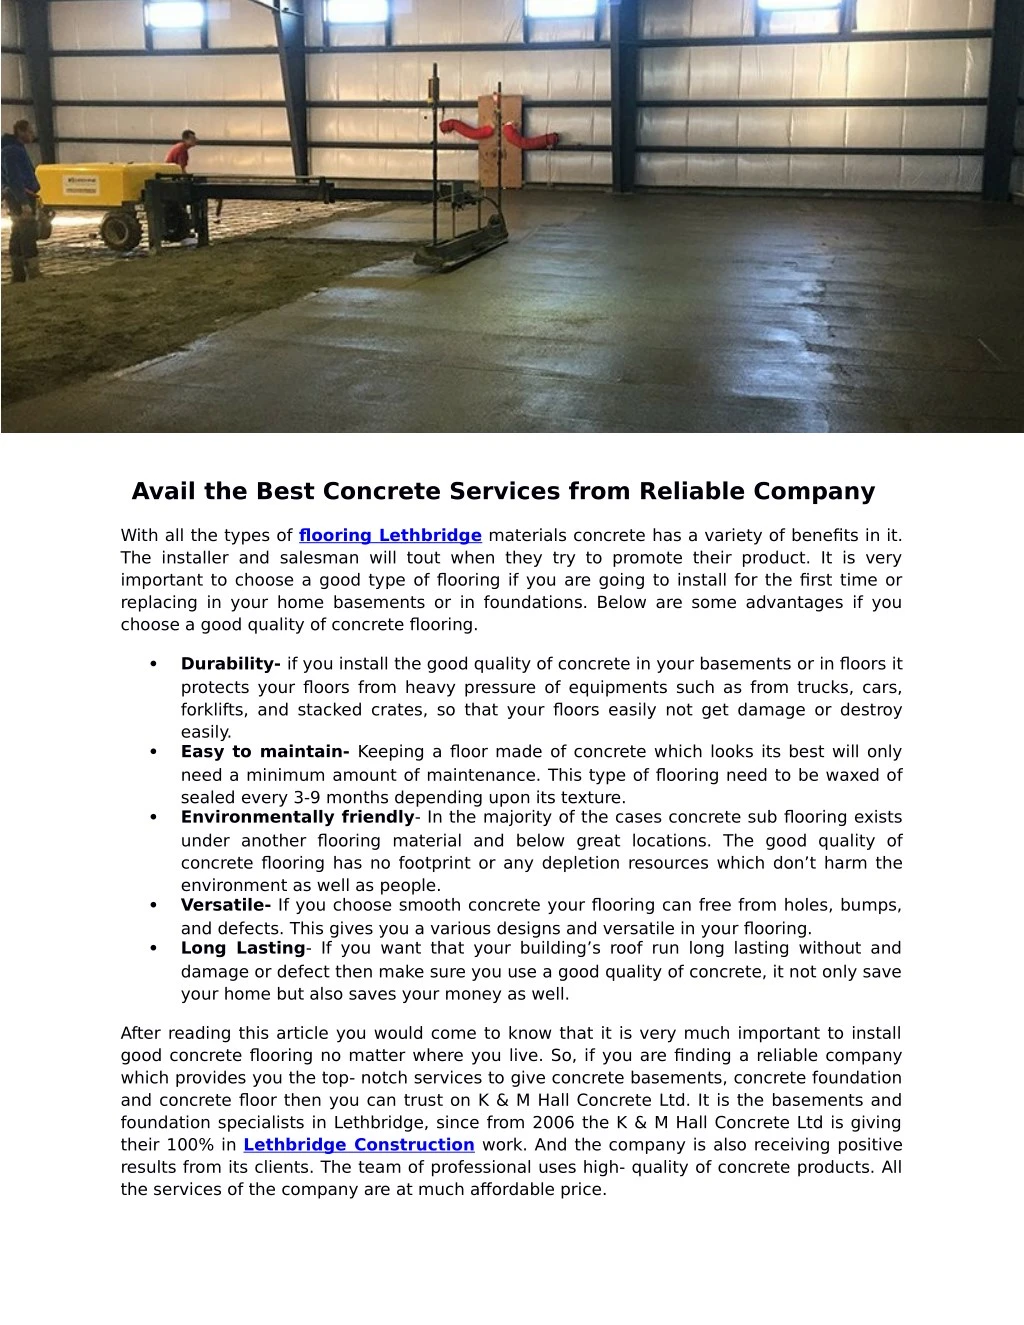 avail the best concrete services from reliable